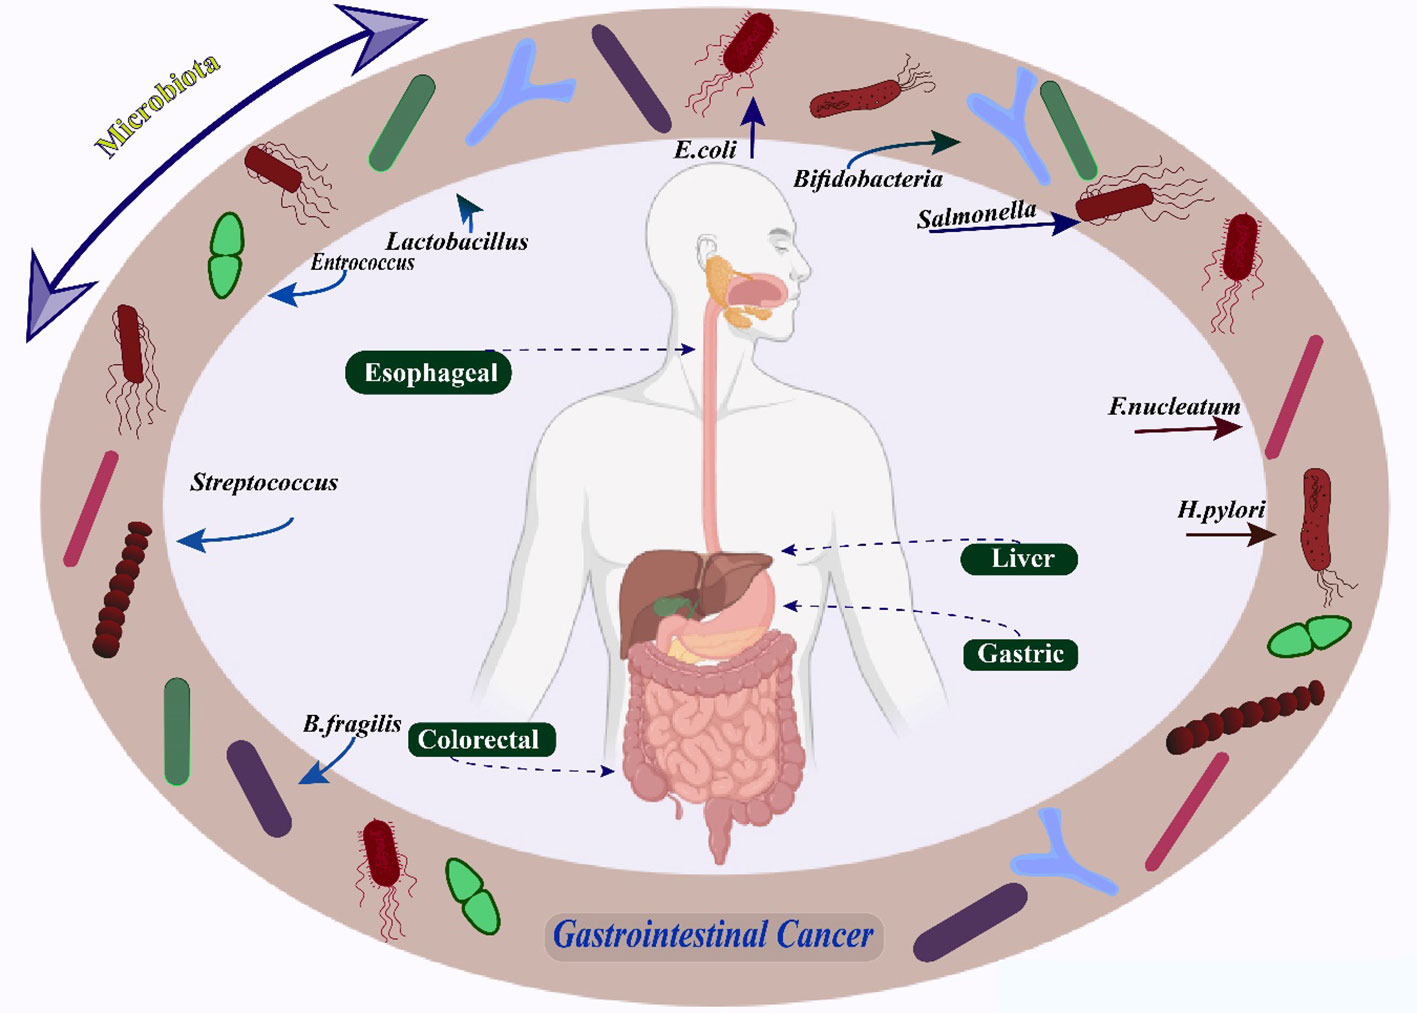 Frontiers  The role of microbiomes in gastrointestinal cancers